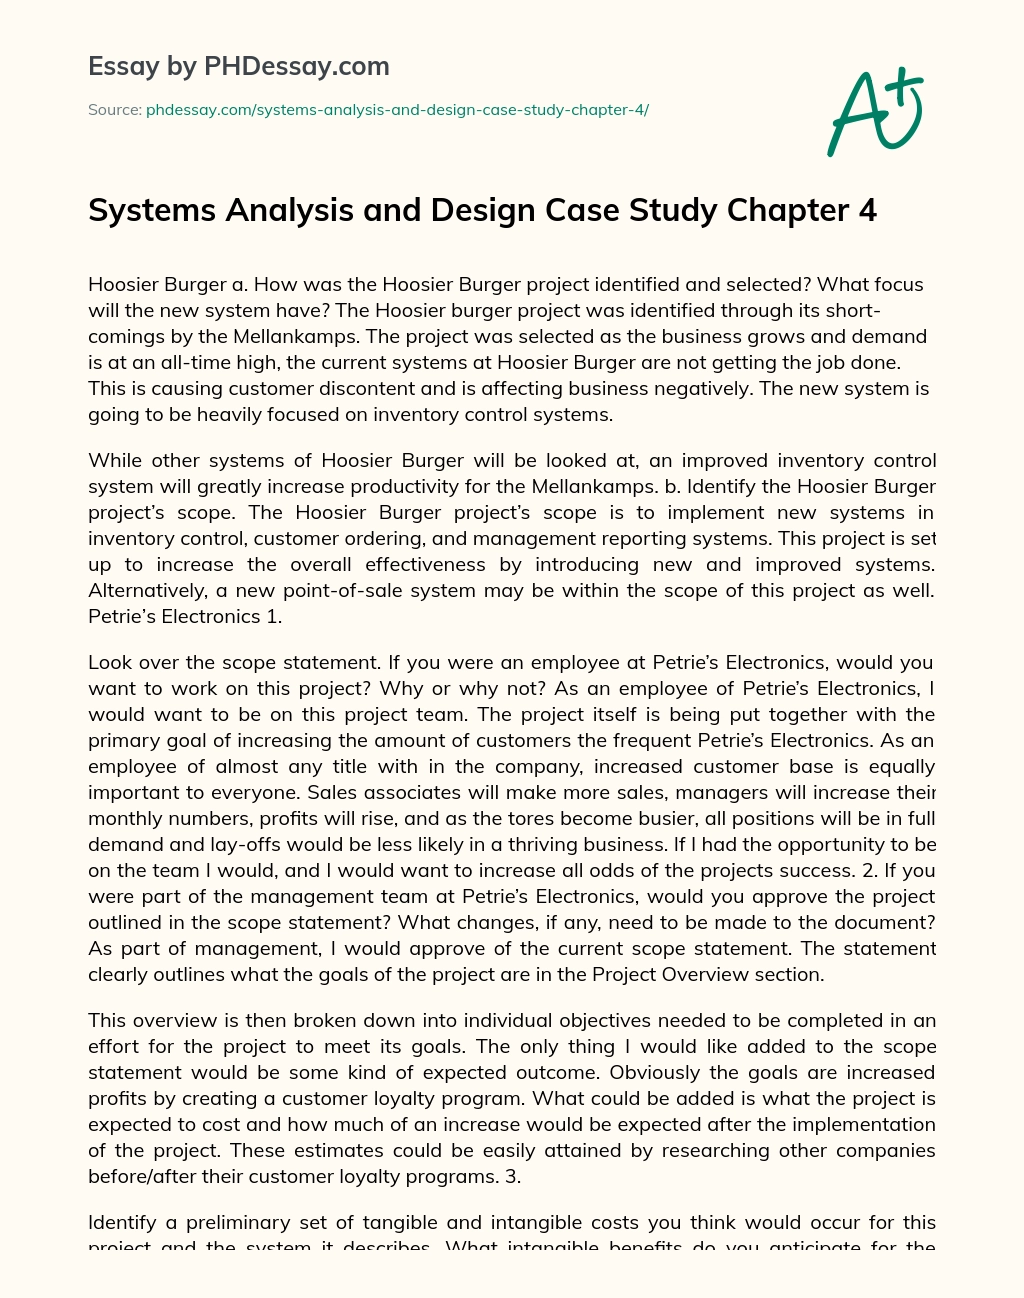 Systems Analysis and Design essay